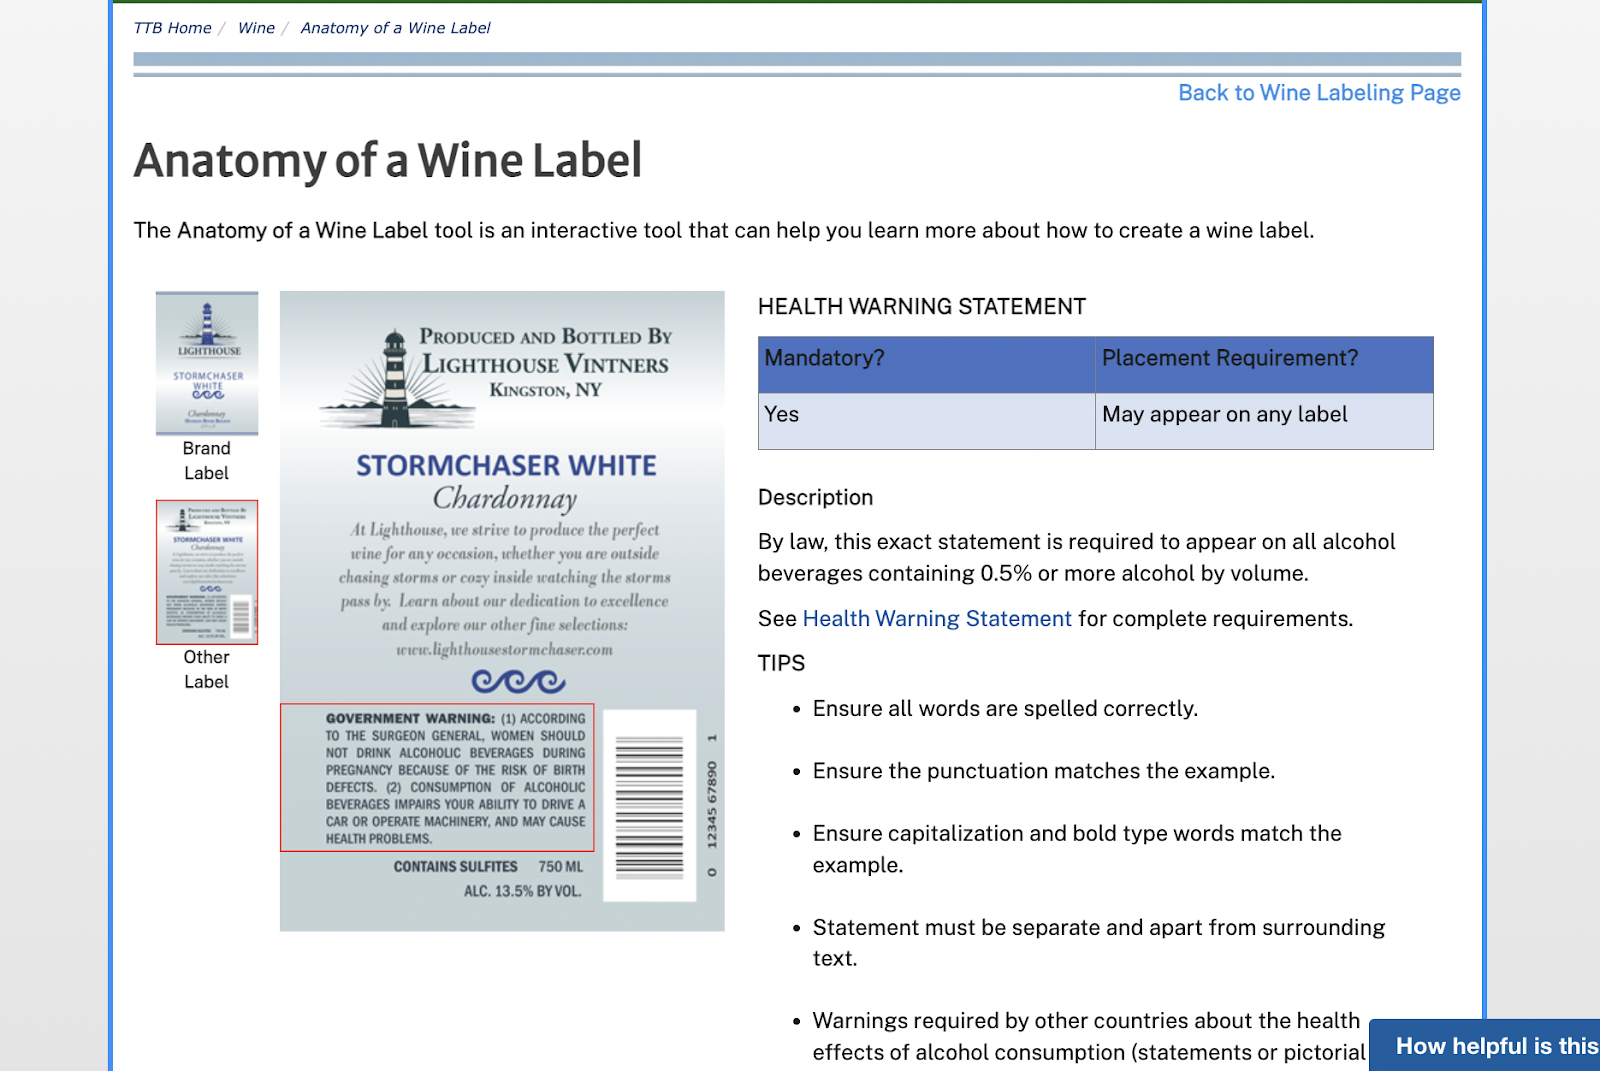 Anatomy of a Wine label screenshot from US Department Treasury website